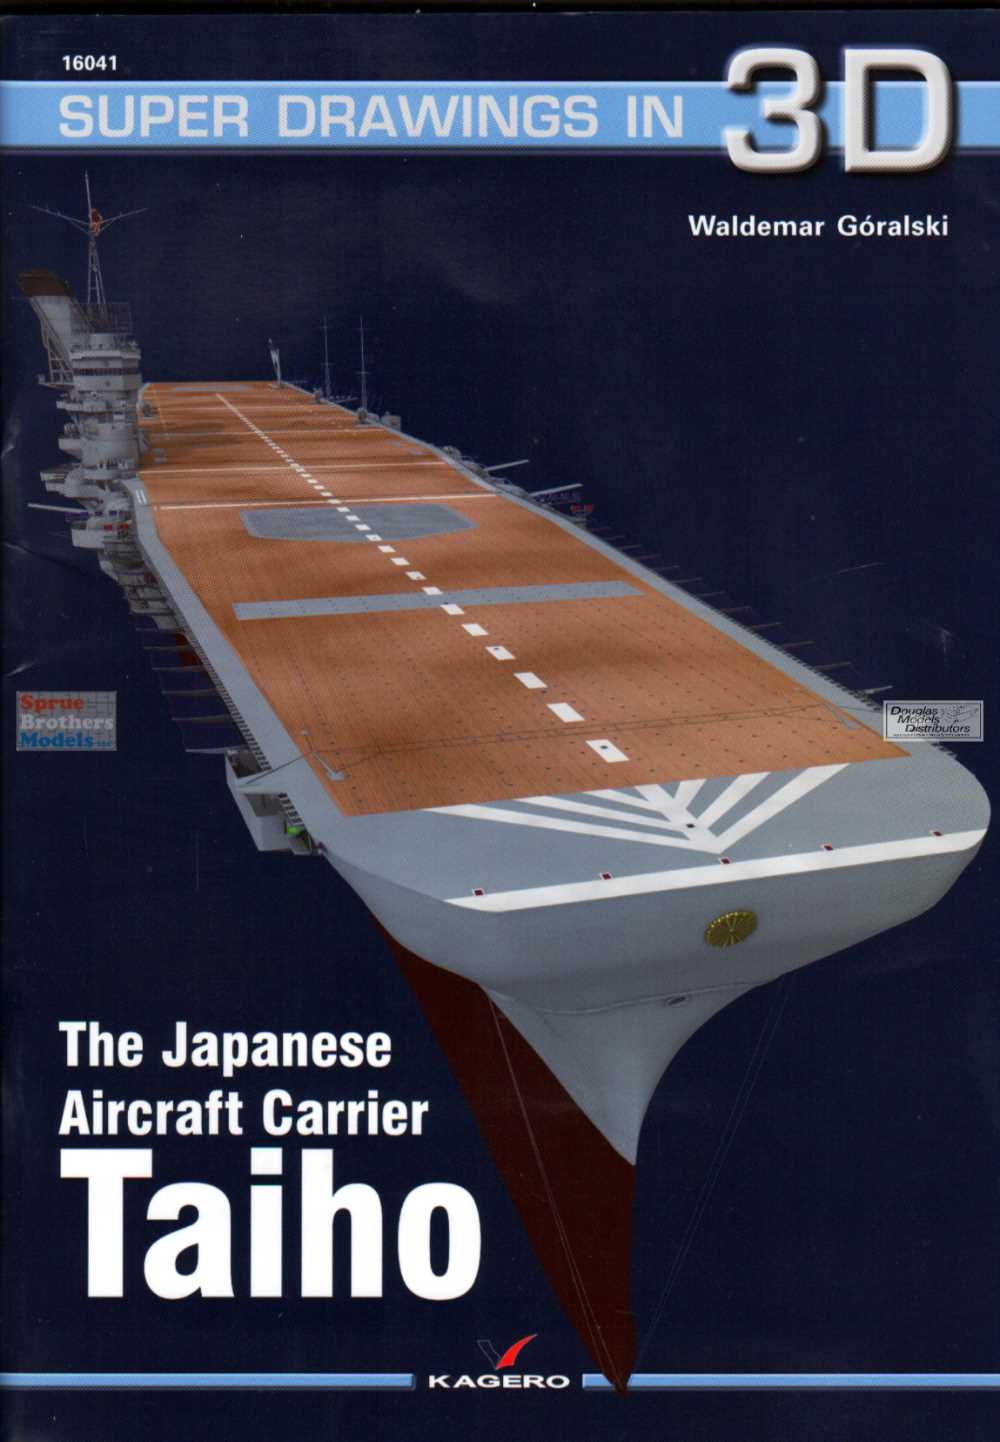 Kagero Super Drawings 3D: The Japanese Aircraft Carrier Taiho 16041C